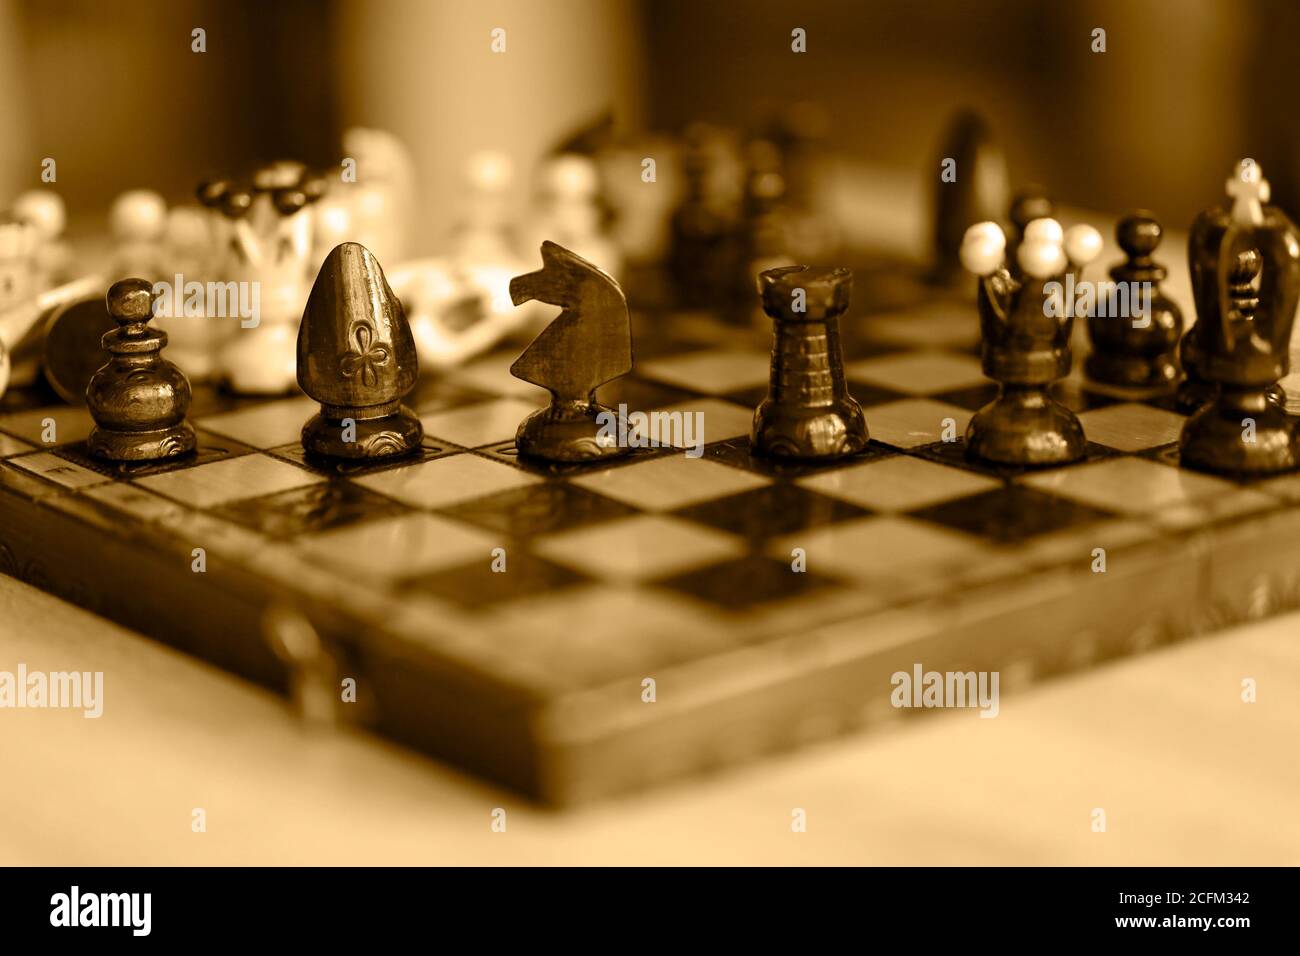 Chess pieces on wooden game board. Pieces include the pawn, king, queen, bishop, knight, and rook Stock Photo